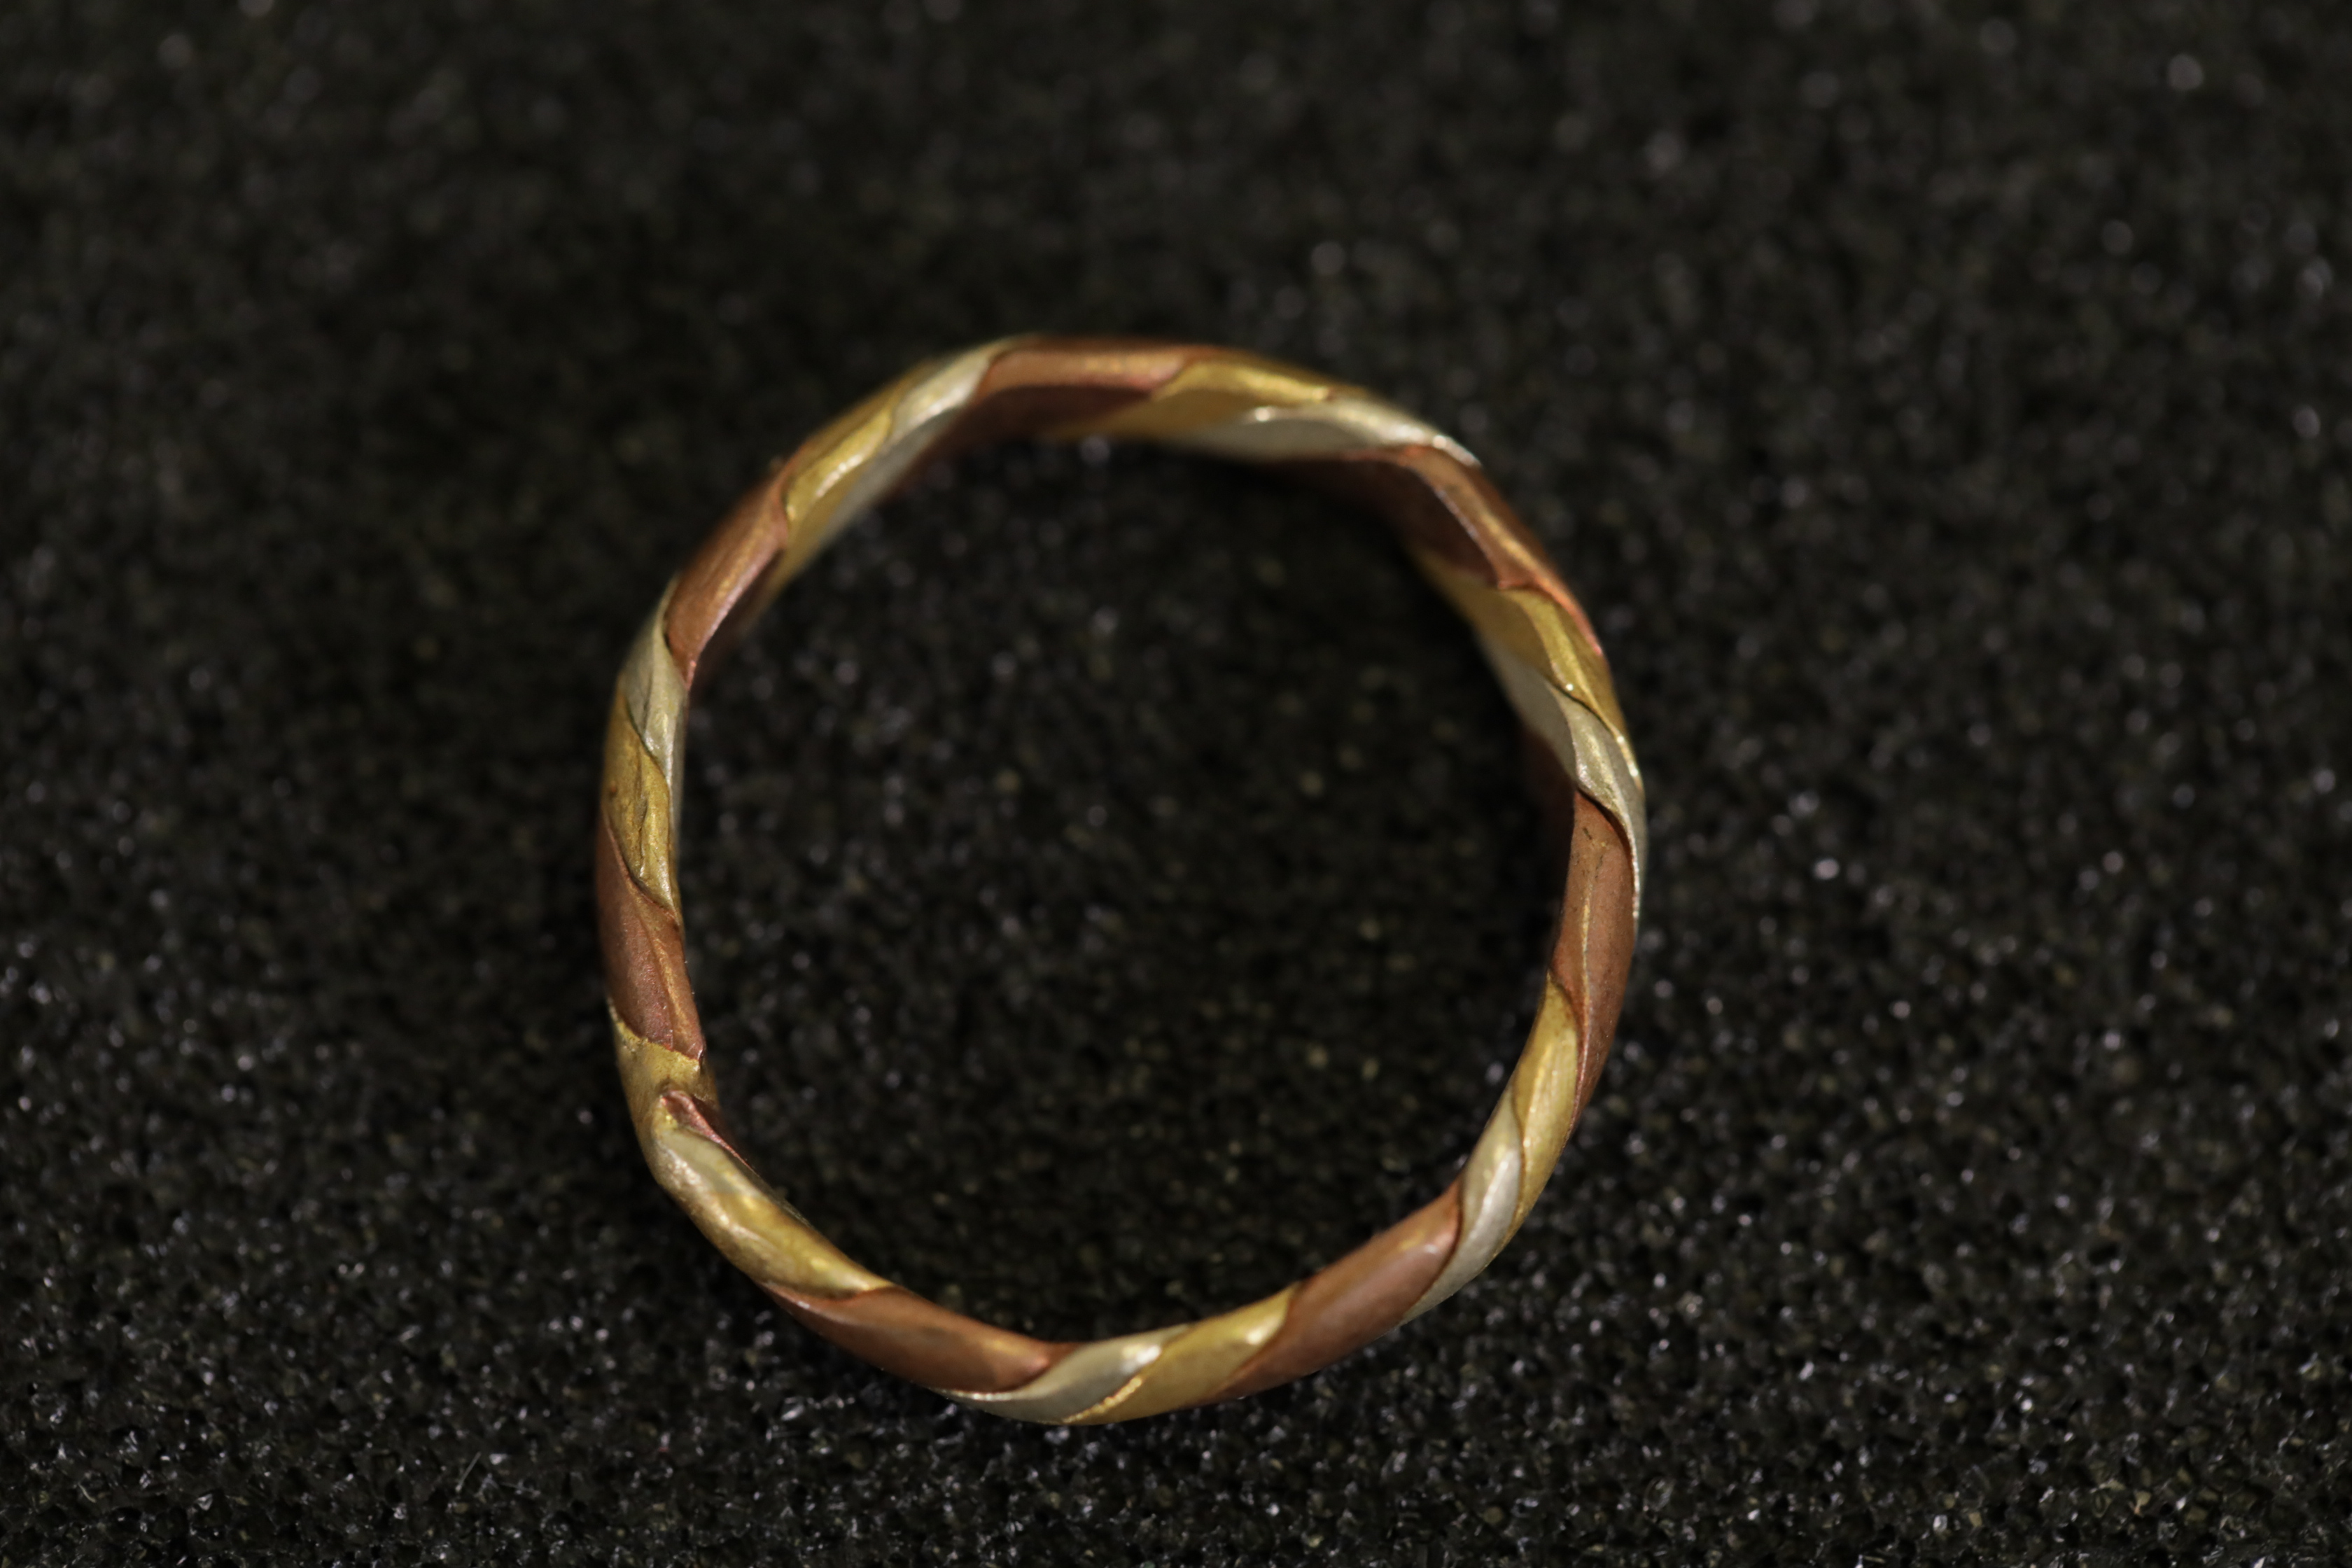 3 Metal Twist Ring of Age - Image 8 of 10